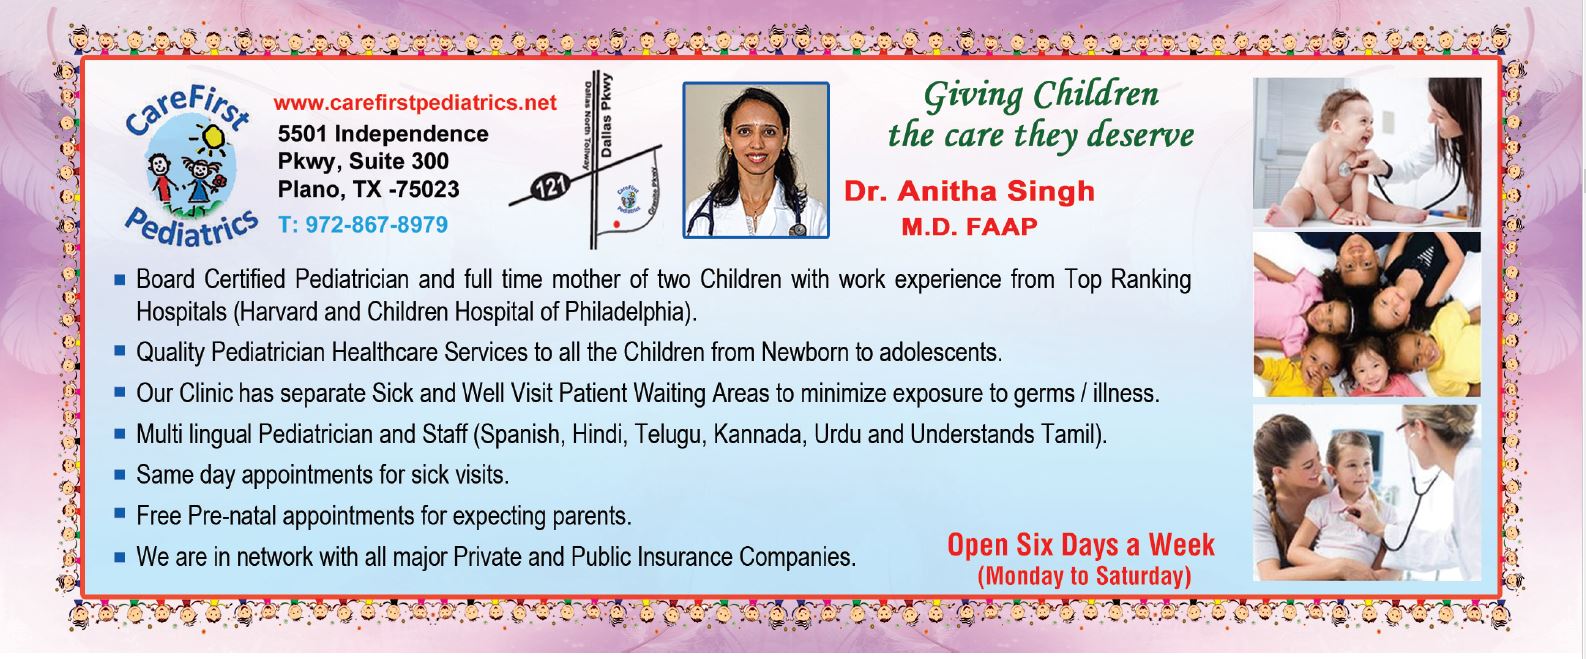 Care First Pediatrics- Dr Anitha S Singh M.D. FAAP – 5501 Independence Pkwy, Suite 300, PLANO, TX, 75023